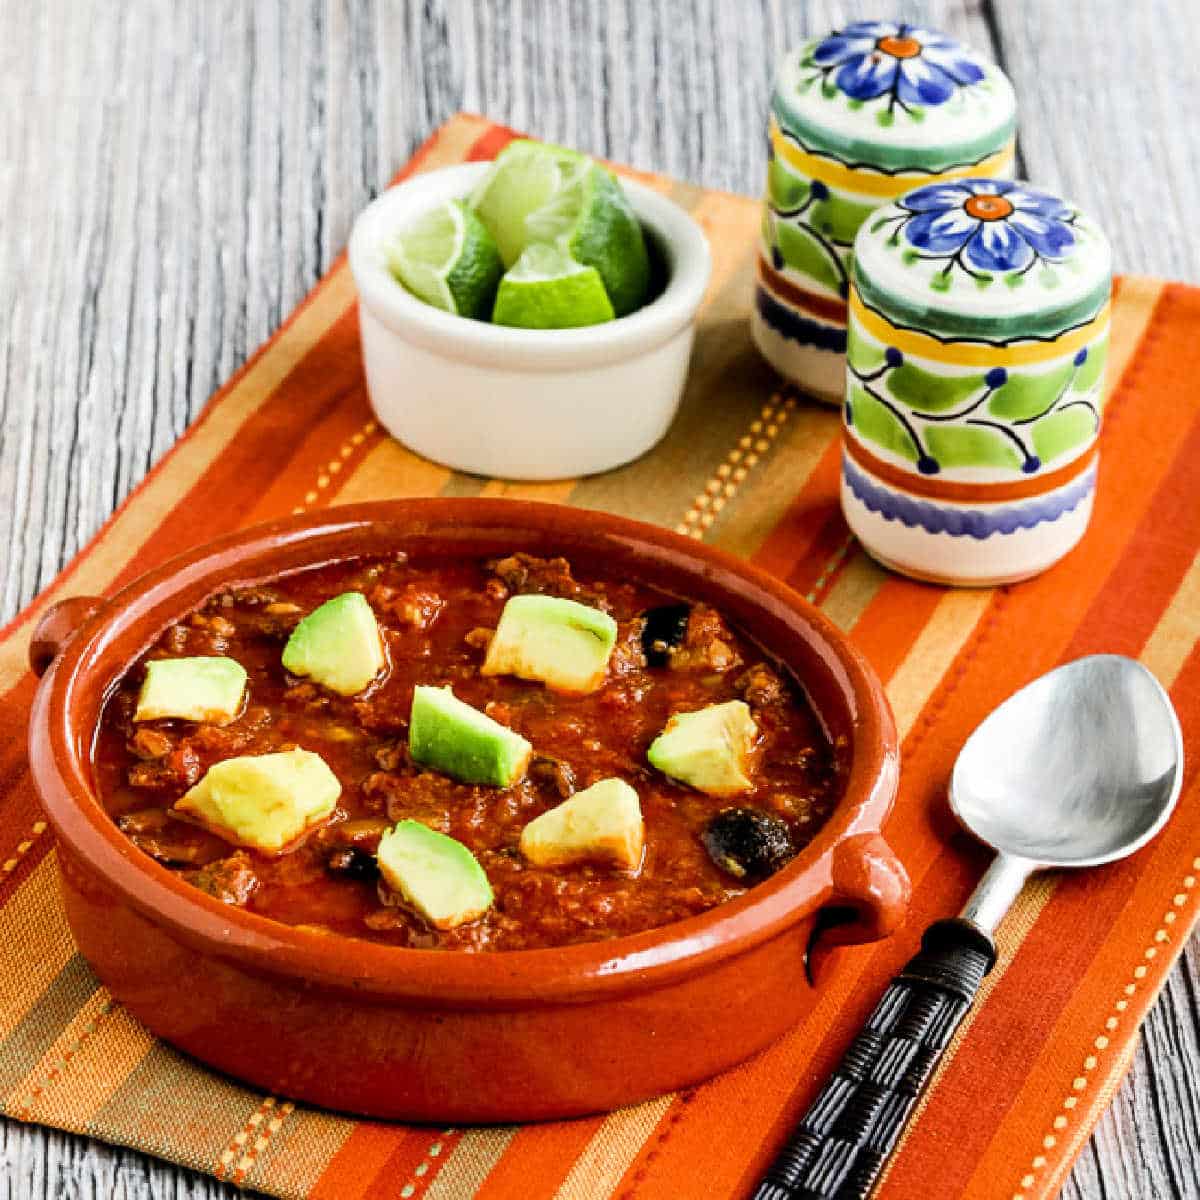 Square image for Low-Carb Southwestern Beef Stew shown in terra cotta bowl with limes and Mexican salt and pepper shakers.